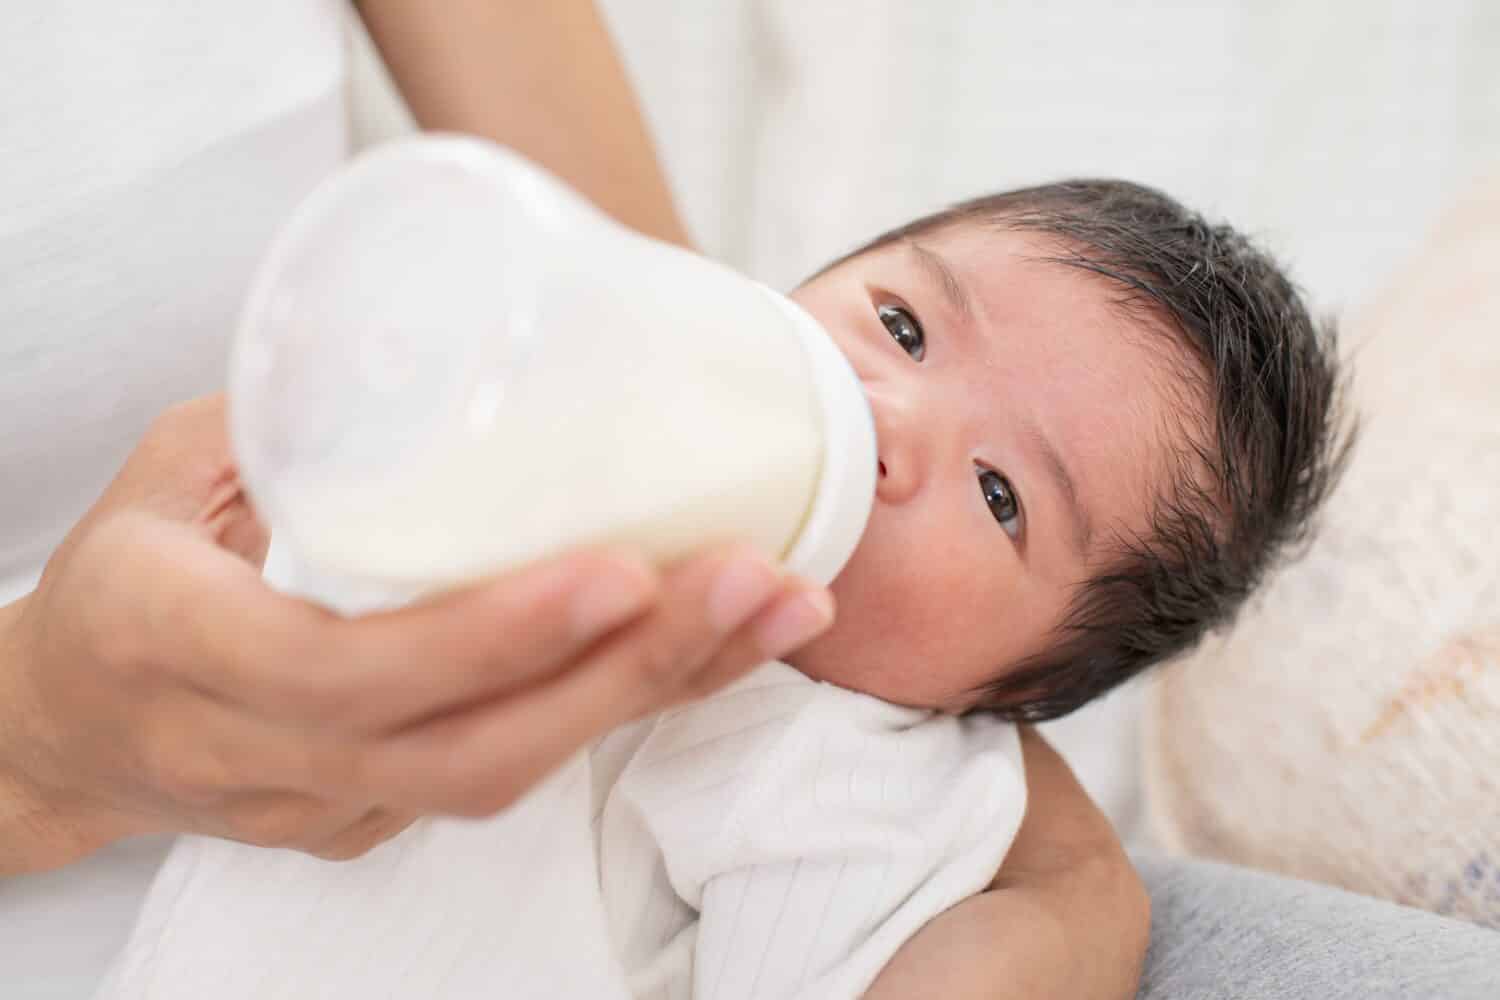 mother feeding baby boy with fresh milk in plastic bottle in bed closeup. mother breastfeeding and hugging baby. Lactation infant concept.